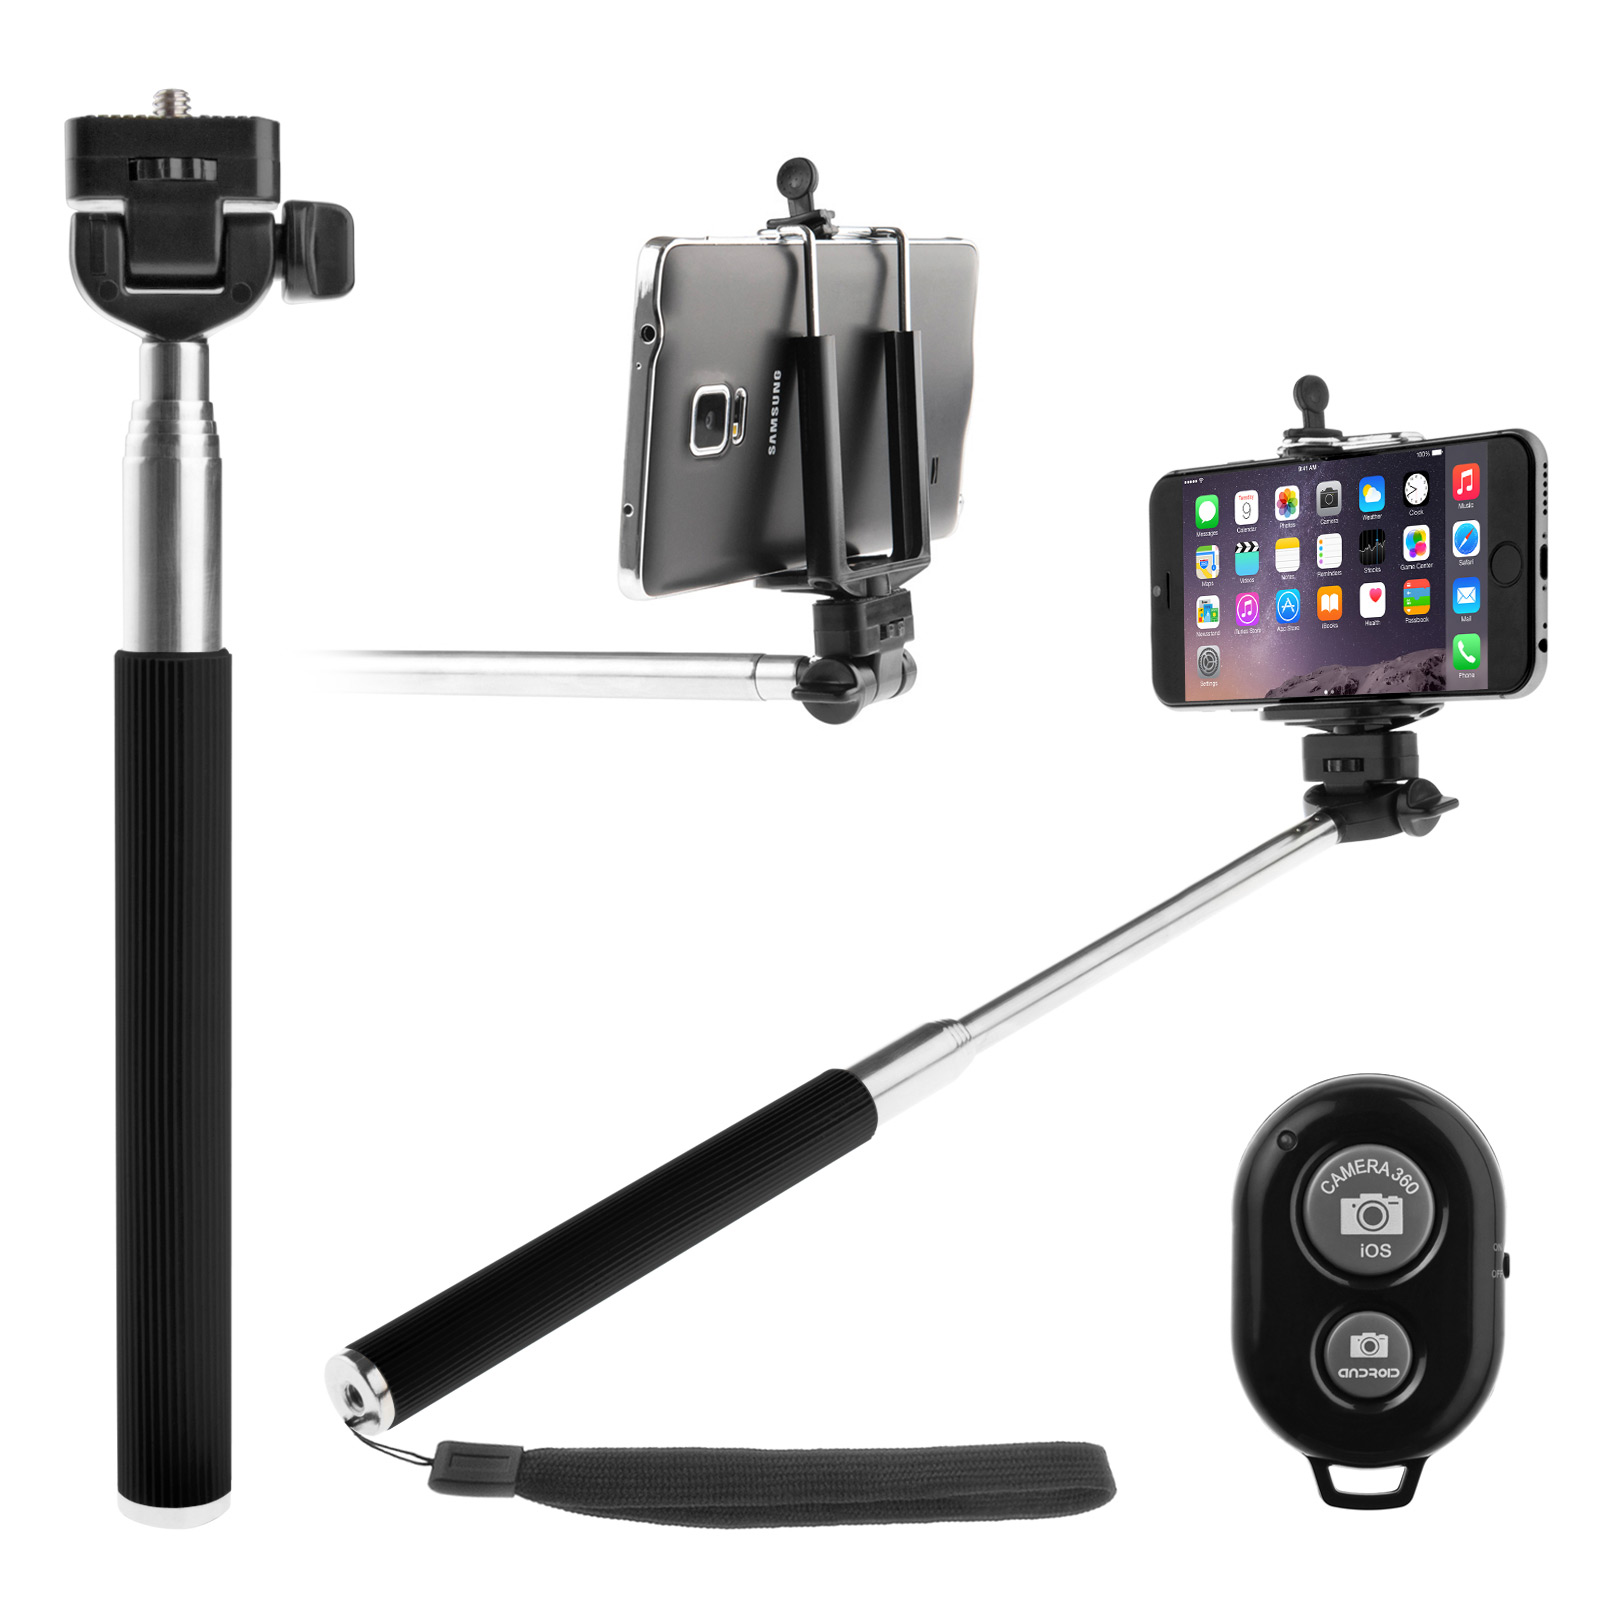 YouSave Selfie Stick for Mobile Phones with Bluetooth Remote